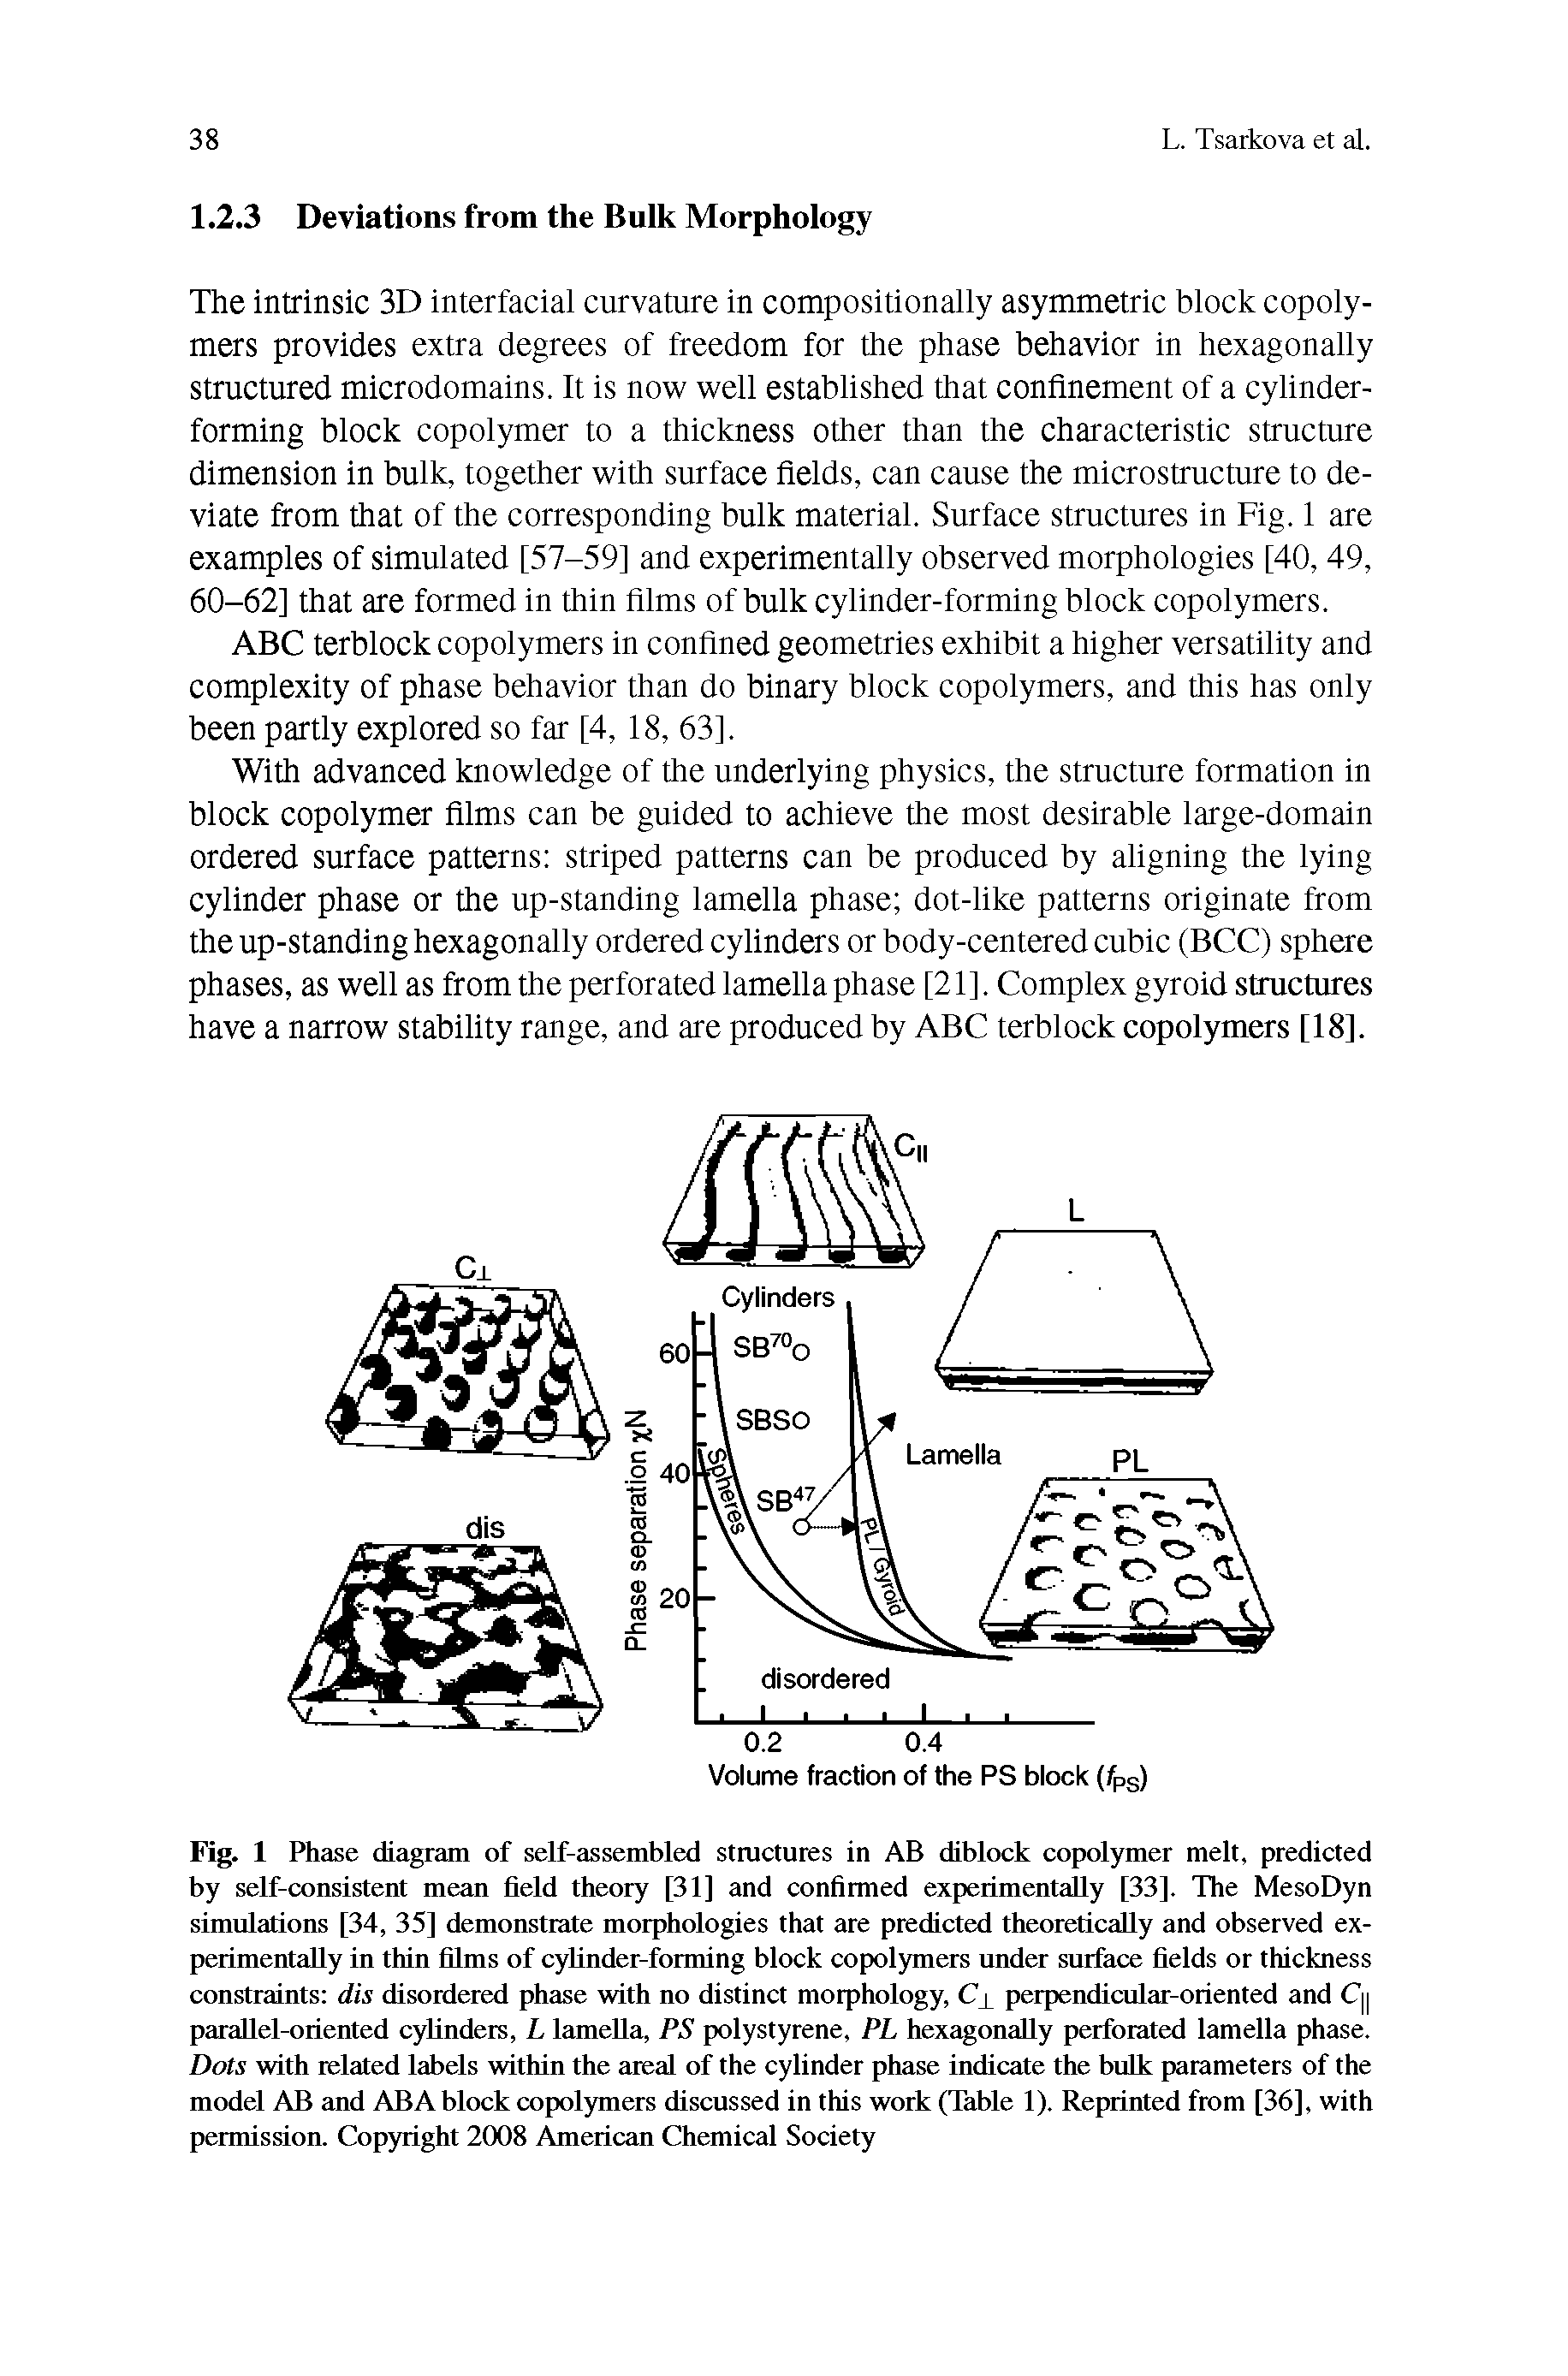 Fig. 1 Phase diagram of self-assembled structures in AB diblock copolymer melt, predicted by self-consistent mean field theory [31] and confirmed experimentally [33]. The MesoDyn simulations [34, 35] demonstrate morphologies that are predicted theoretically and observed experimentally in thin films of cylinder-forming block copolymers under surface fields or thickness constraints dis disordered phase with no distinct morphology, C perpendicular-oriented and Cy parallel-oriented cylinders, L lamella, PS polystyrene, PL hexagonally perforated lamella phase. Dots with related labels within the areal of the cylinder phase indicate the bulk parameters of the model AB and ABA block copolymers discussed in this work (Table 1). Reprinted from [36], with permission. Copyright 2008 American Chemical Society...